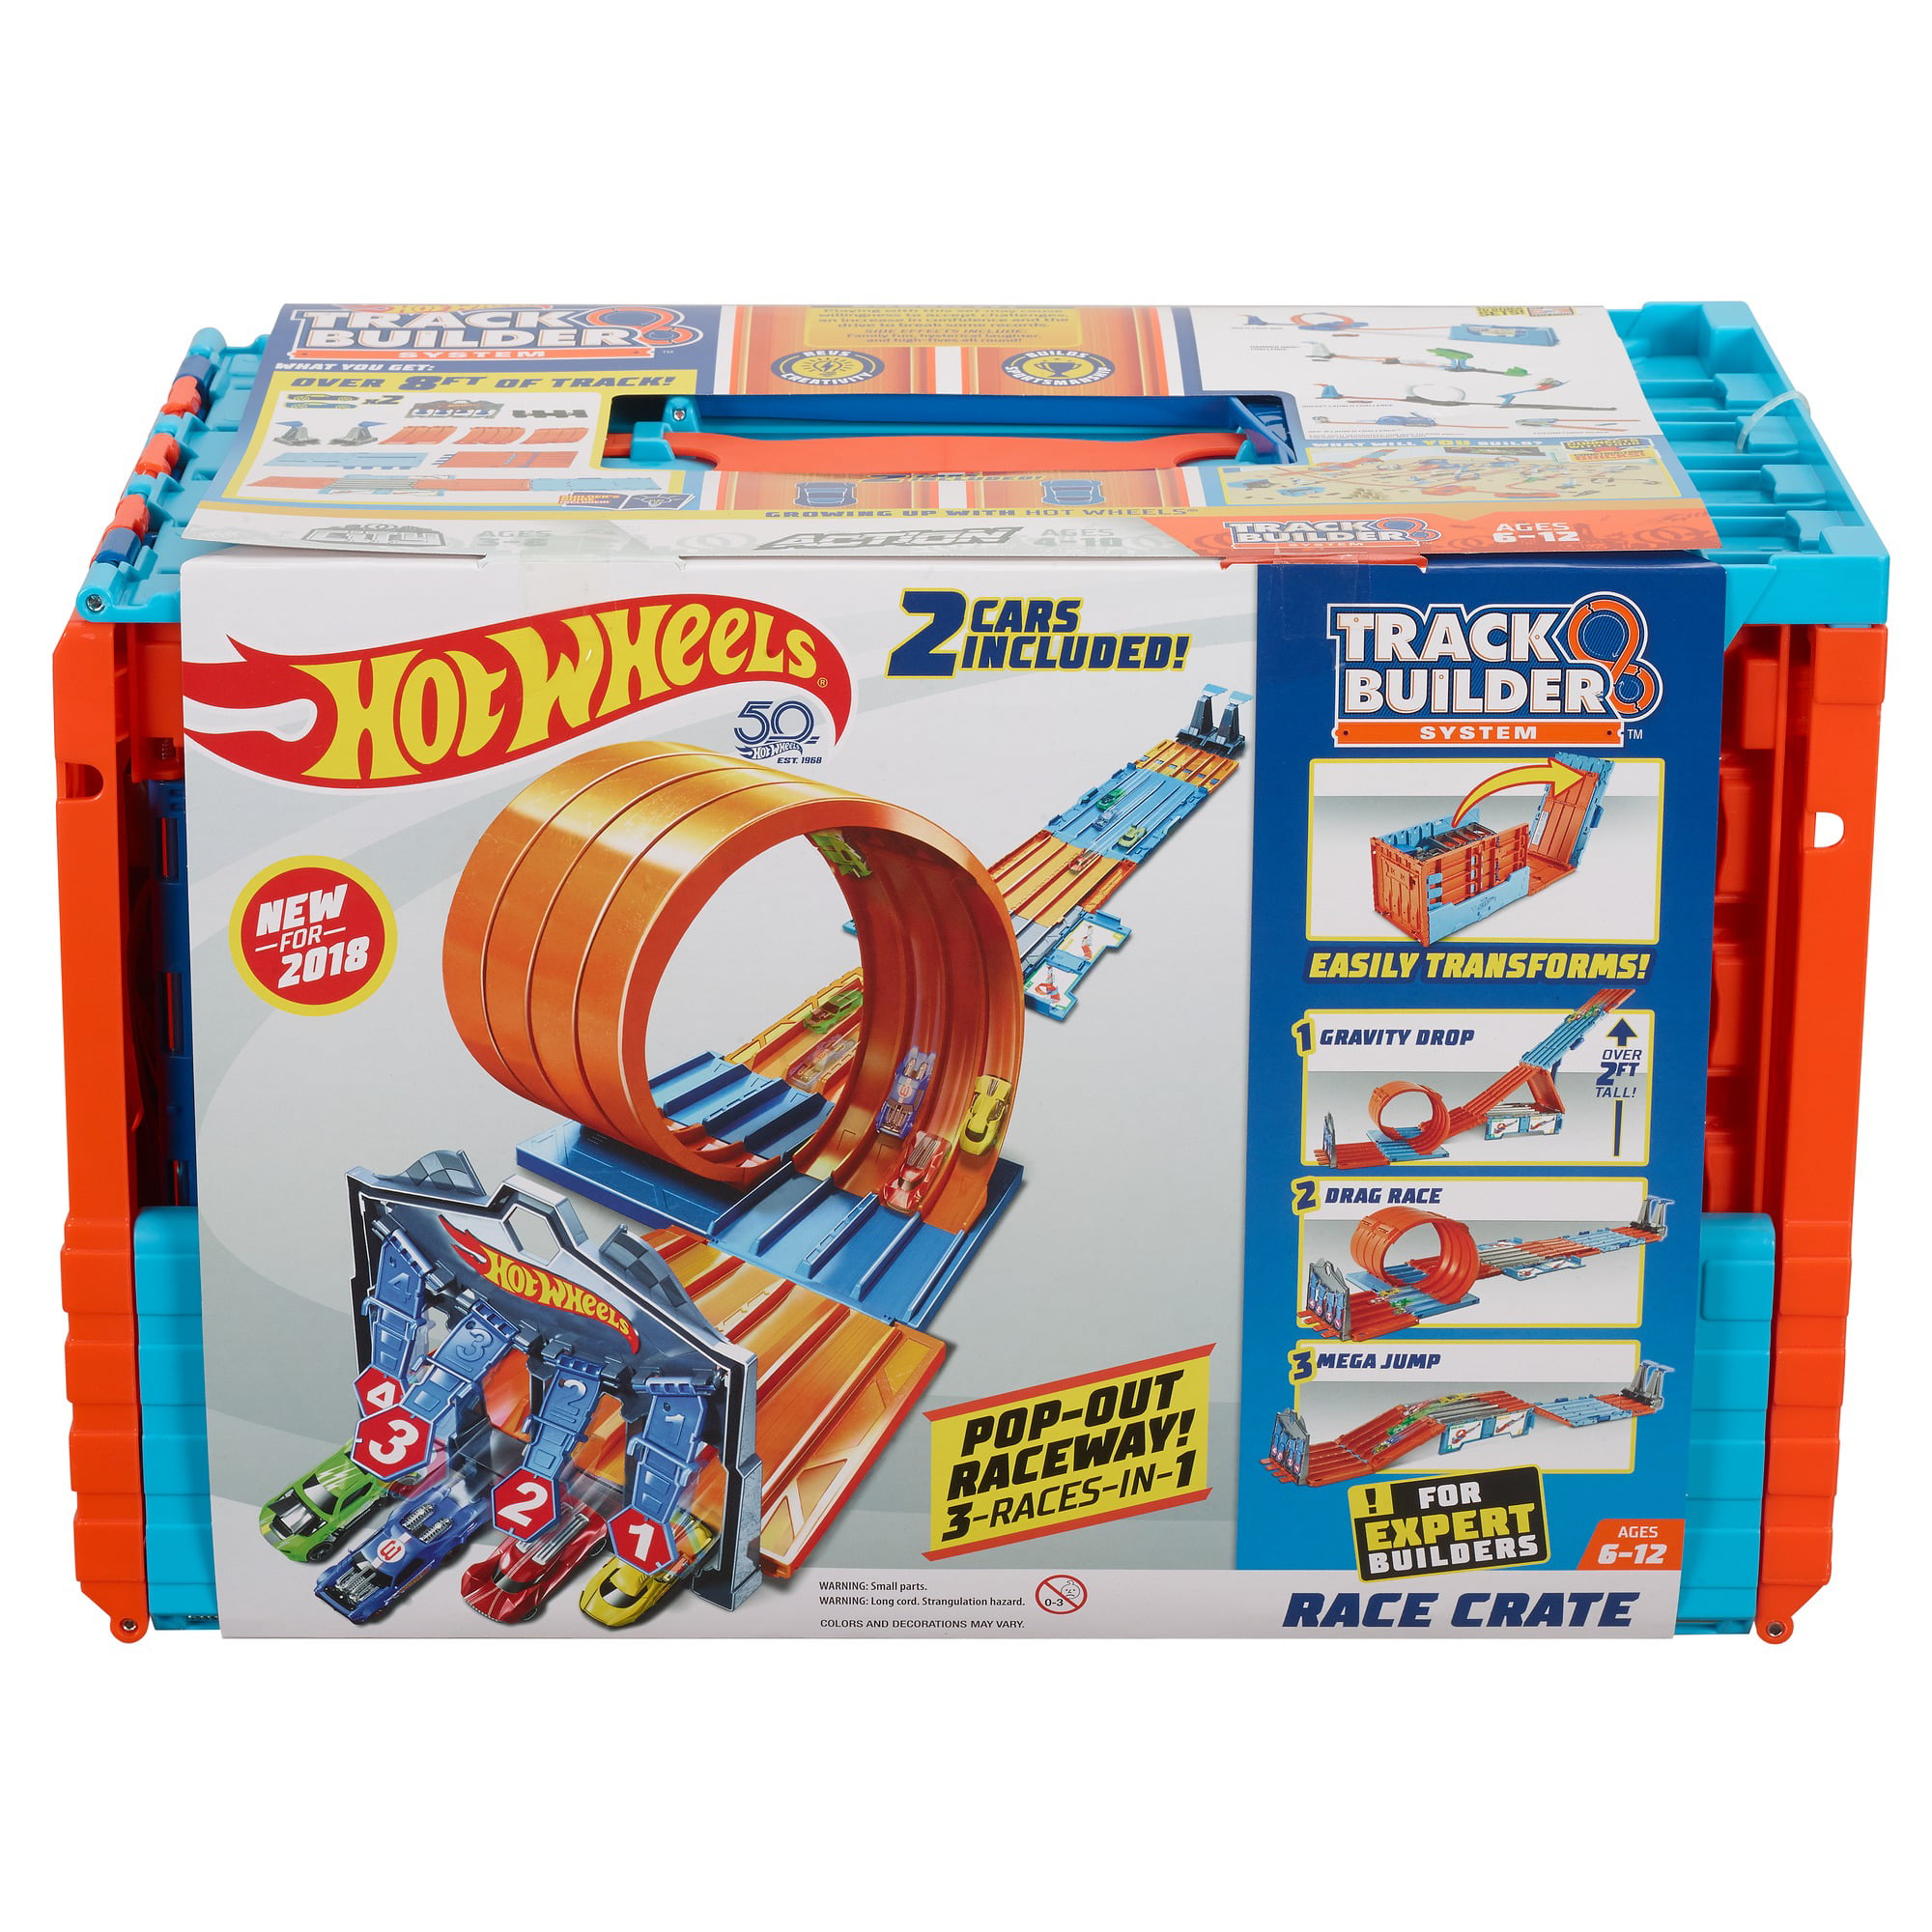 Track Builder System Drag Race Crate Kids Toy Car Massive Racetracks Playset NEW 